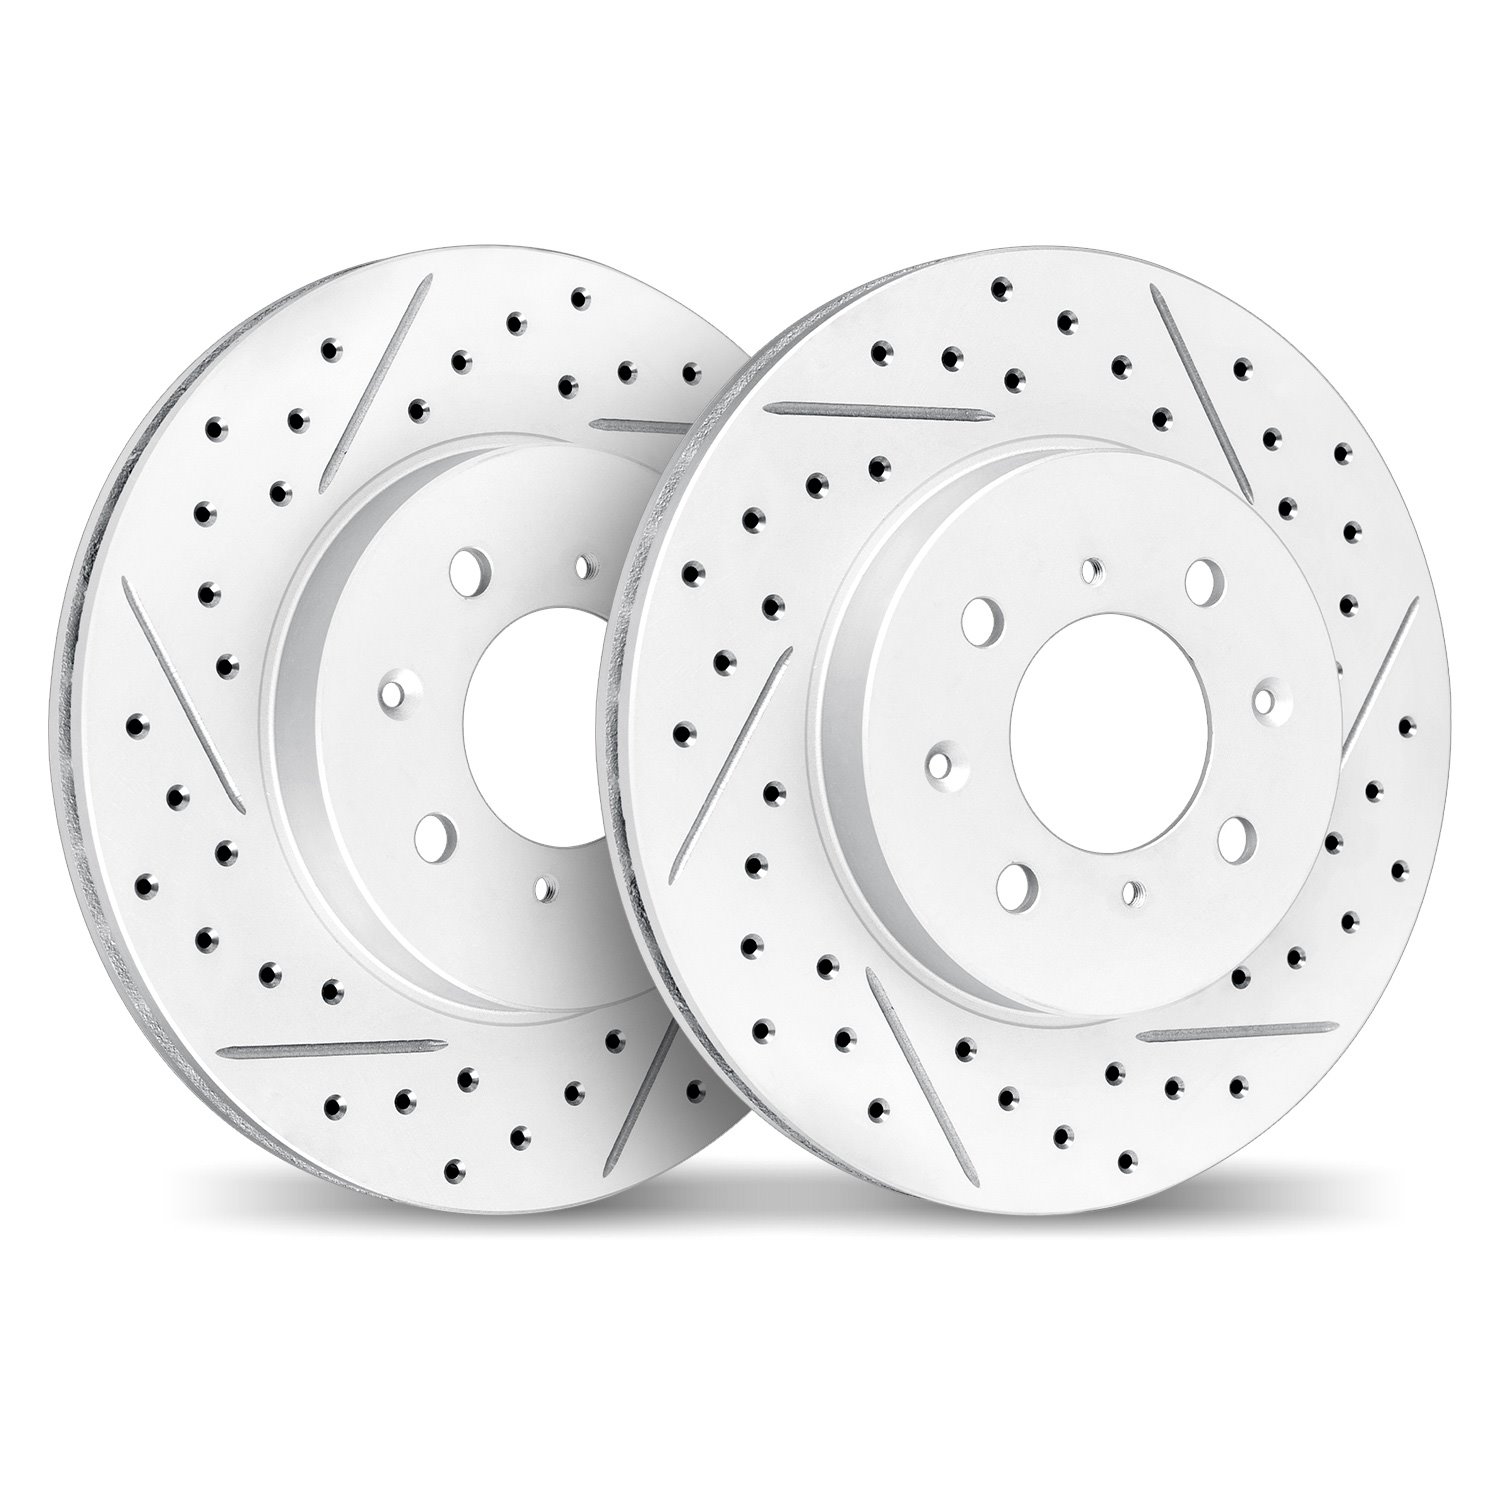 2002-76026 Geoperformance Drilled/Slotted Brake Rotors, 2000-2005 Lexus/Toyota/Scion, Position: Front